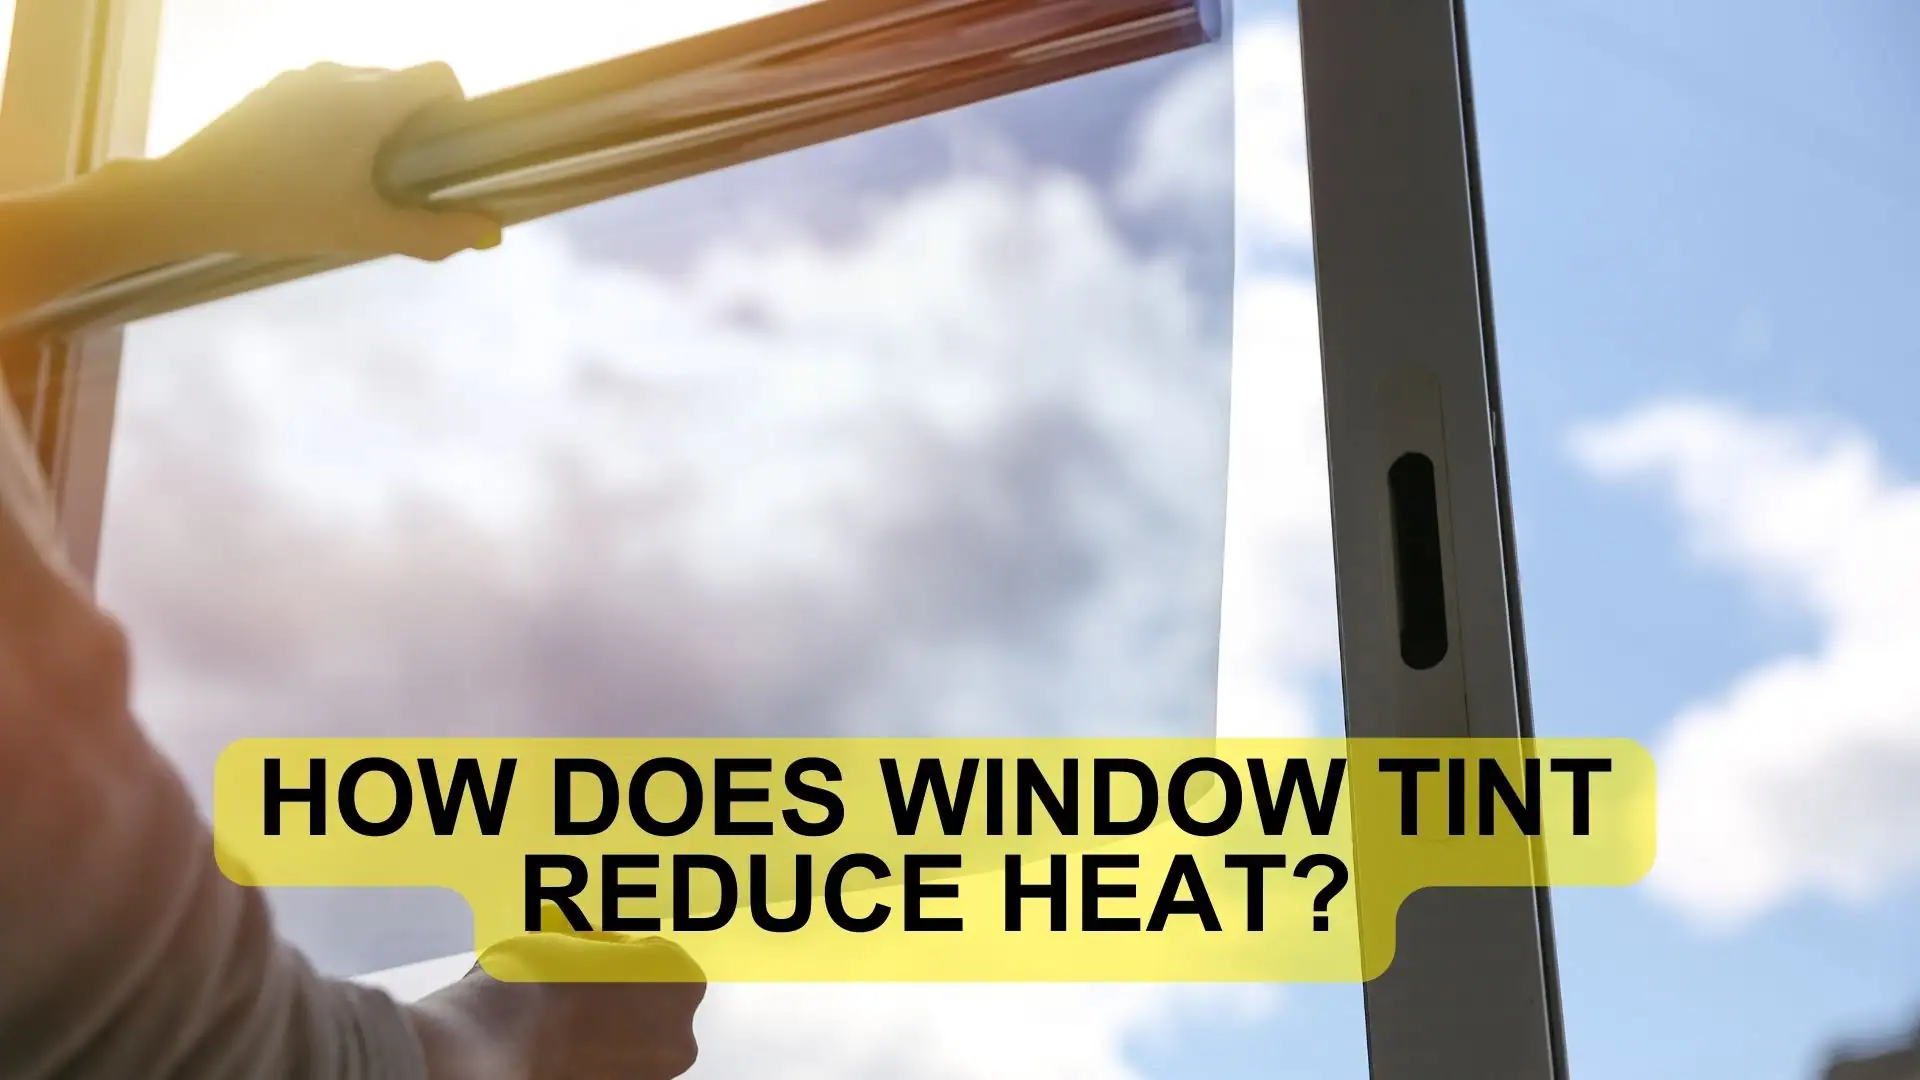 How Does Window Tint Reduce Heat?